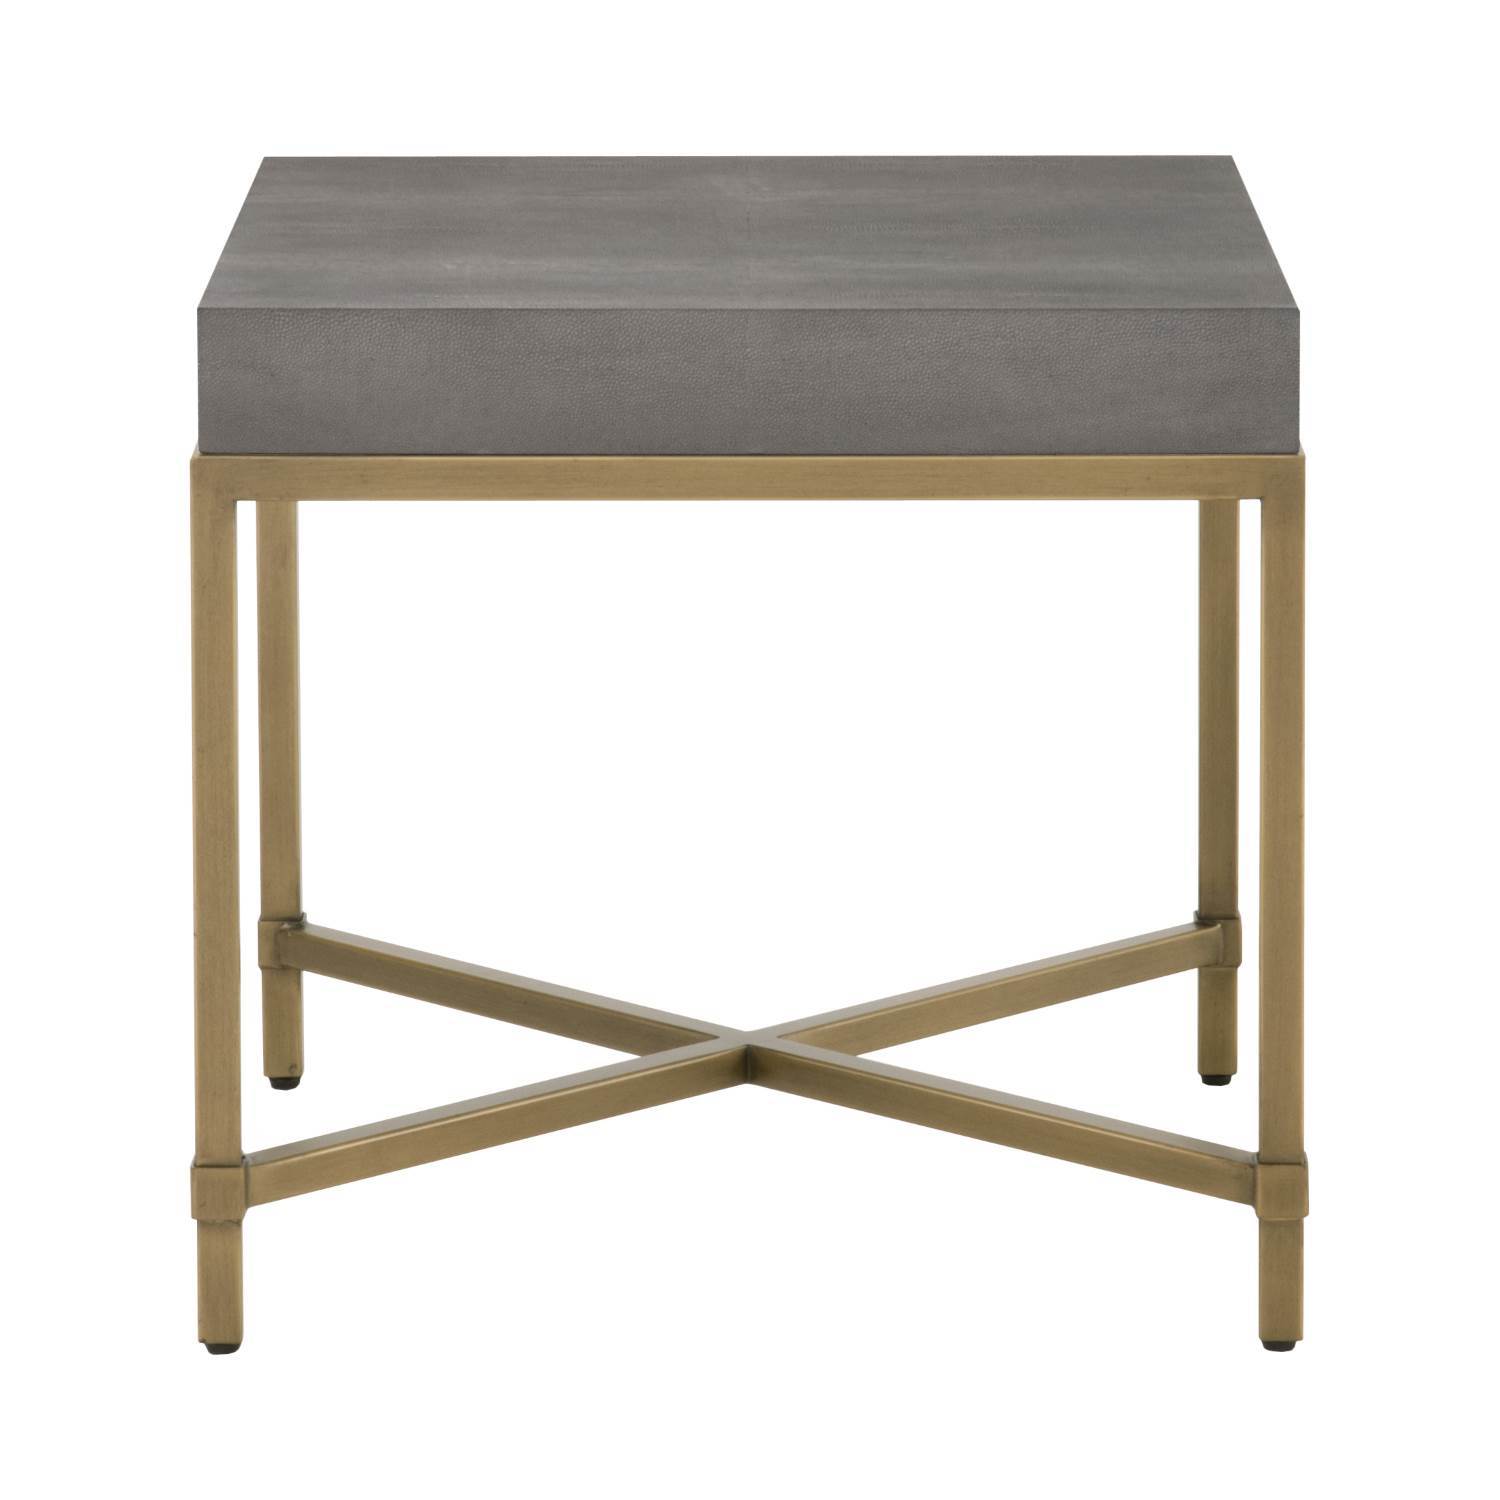 Strand Shagreen End Table in Gray Shagreen